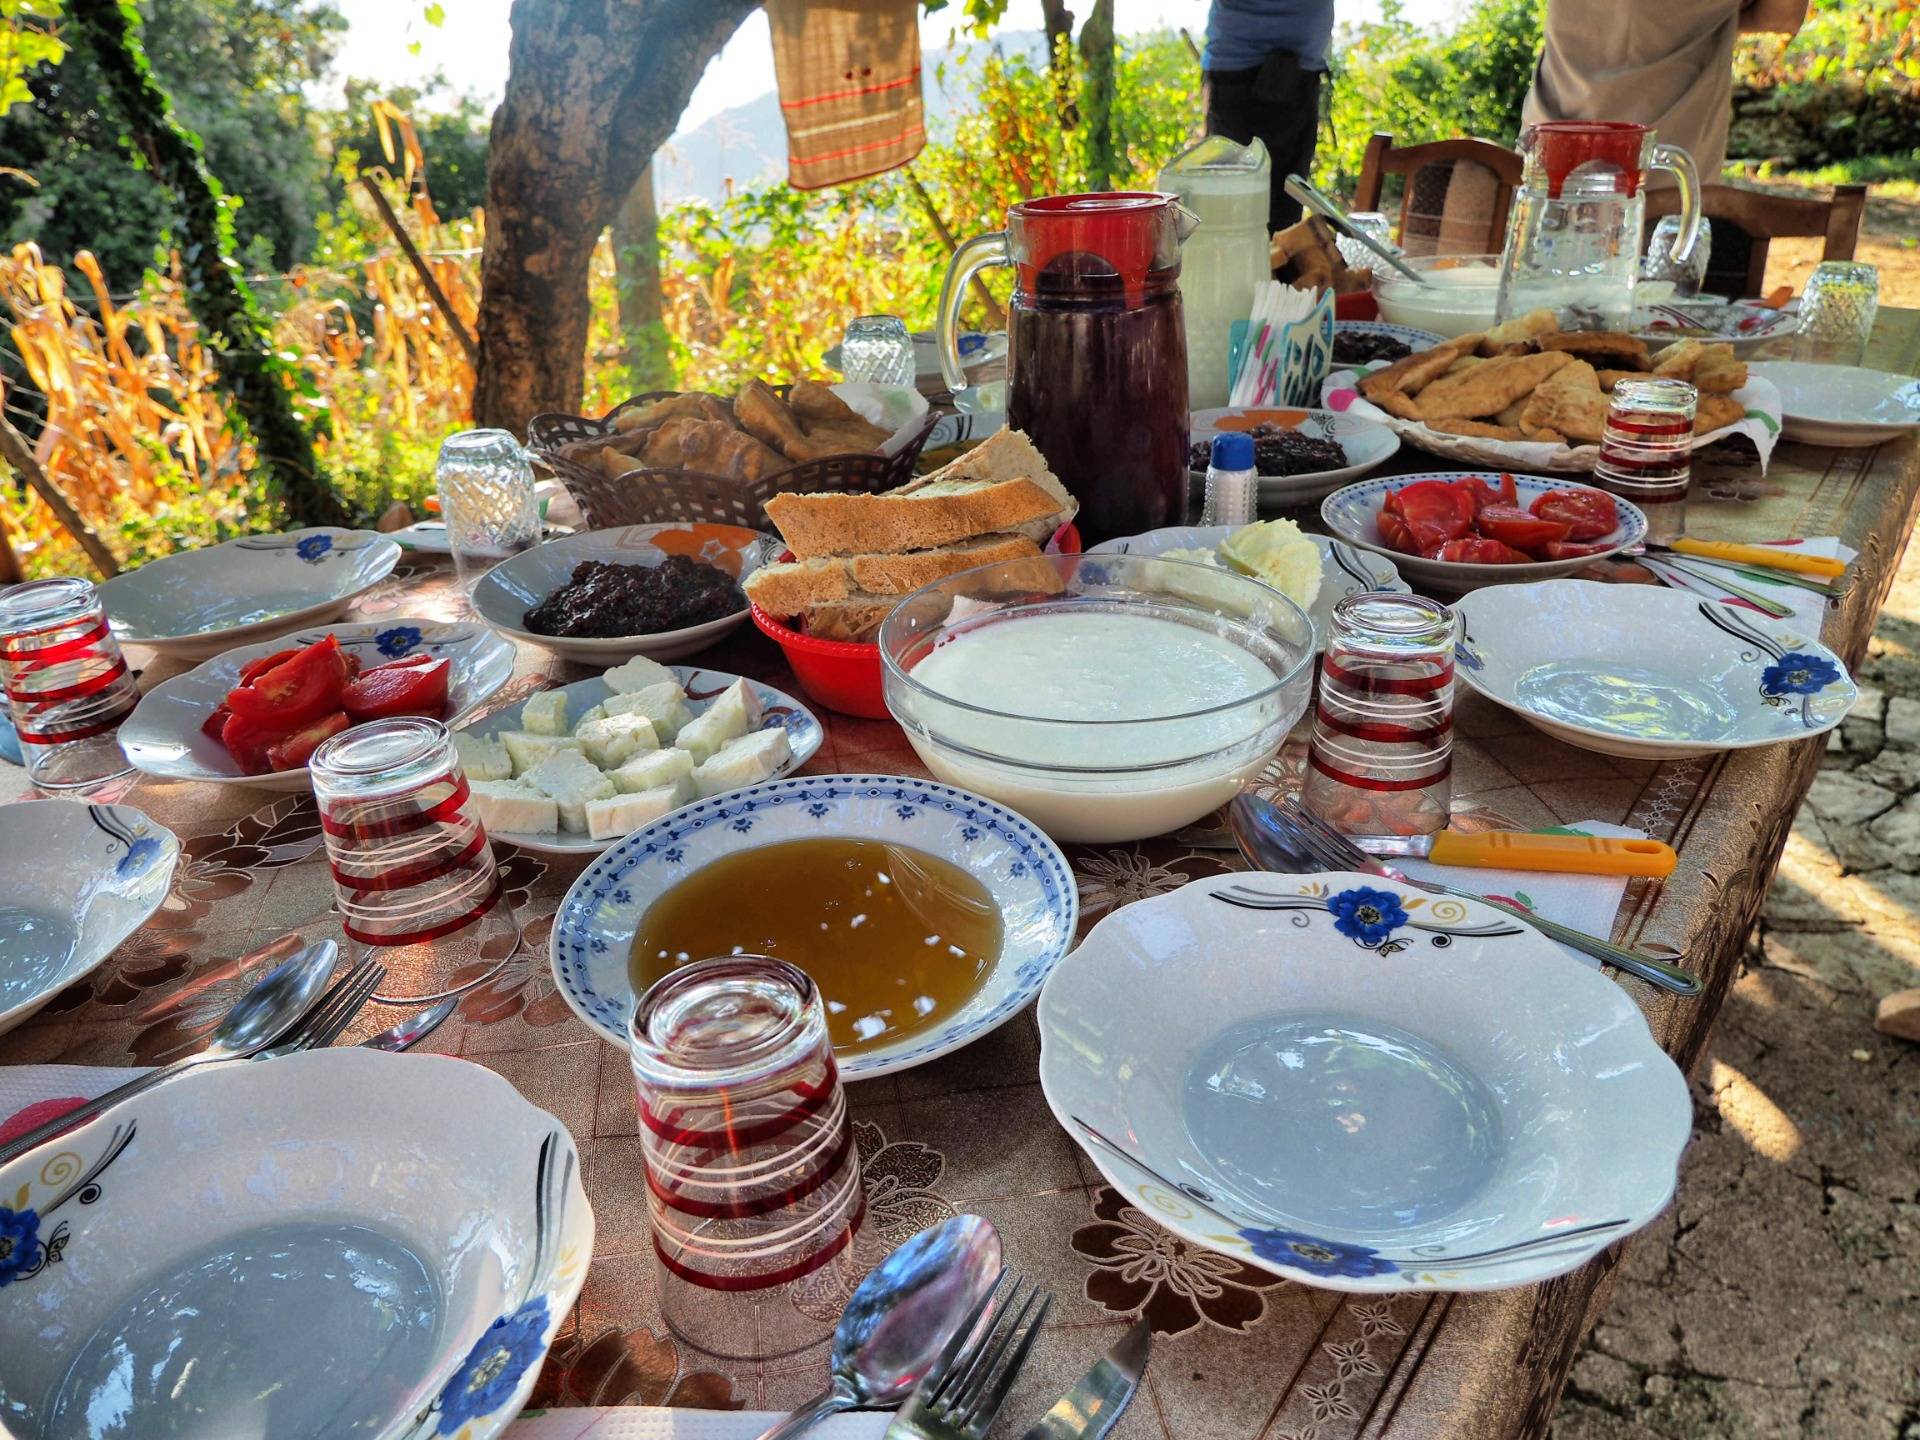 This is the size of a breakfast table in Albania